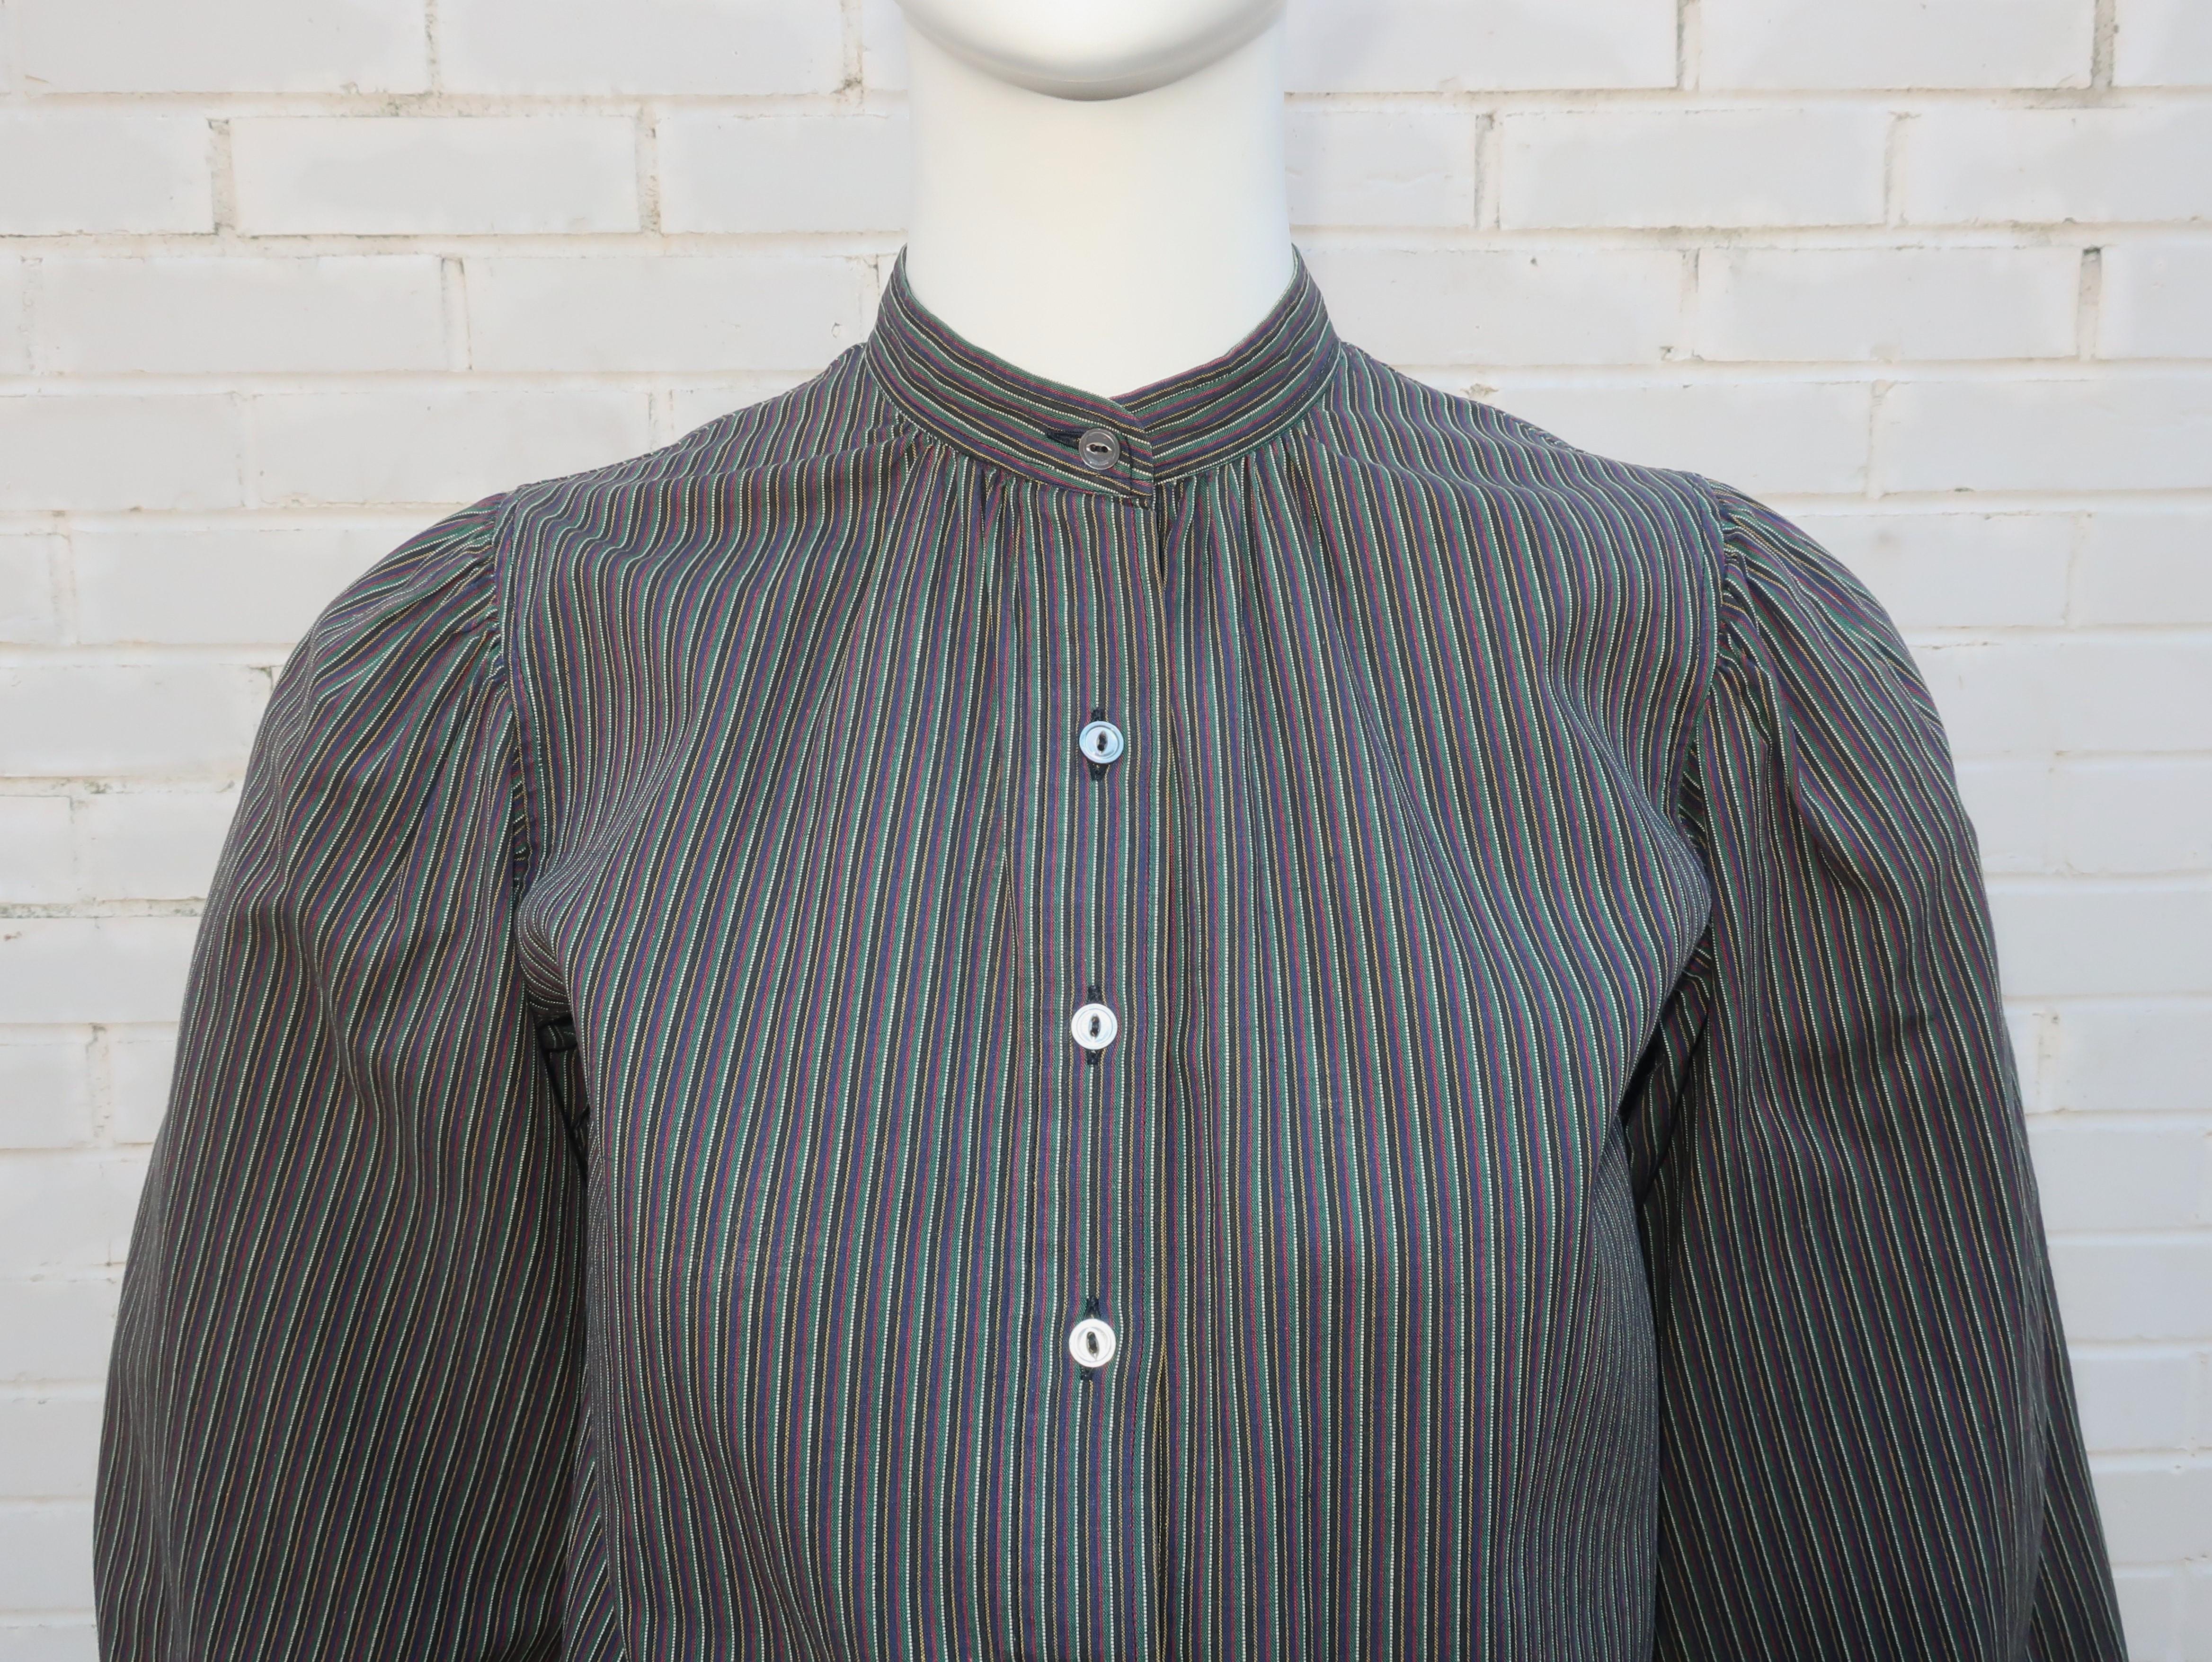 1970's Yves Saint Laurent Rive Gauche striped cotton blouse in a peasant style silhouette.  The fabric is reminiscent of cotton ticking with a relaxed feel in dark shades including black, gray, forest green, red, dark yellow and white.  The pullover